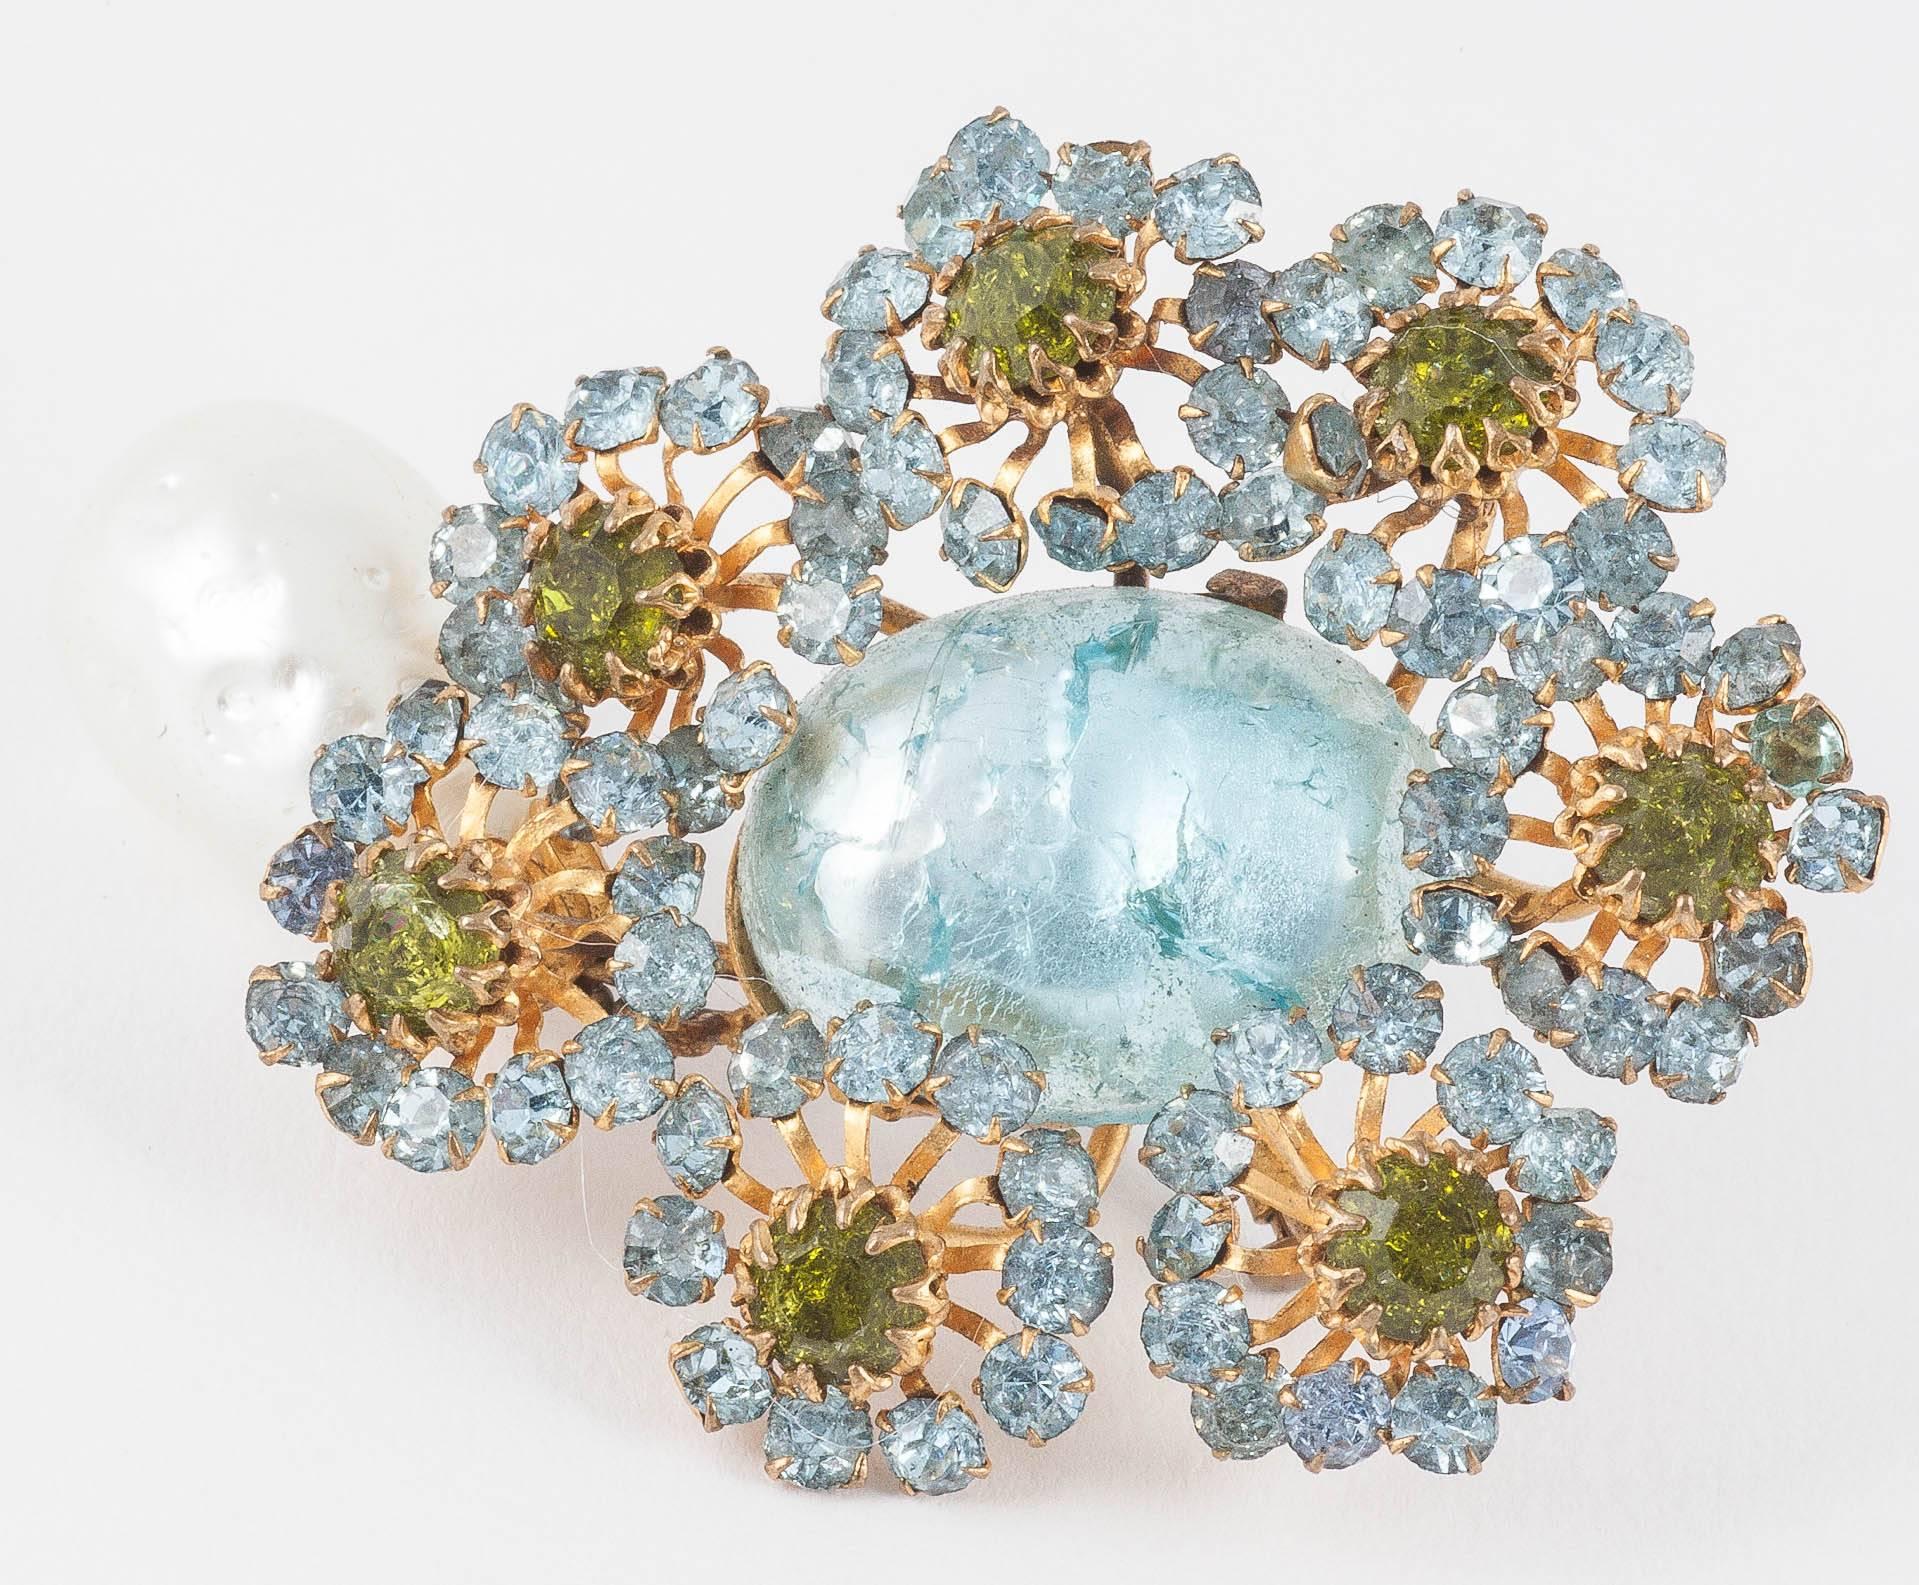 Highly and unusual stylised handmade floral brooch, with a beautiful pendant baroque pearl, suspended from the bottom. Deep chartreuse crackled stones are set amongst soft grey aqua blue stone flowers, surrounding a beautiful large aqua crackle